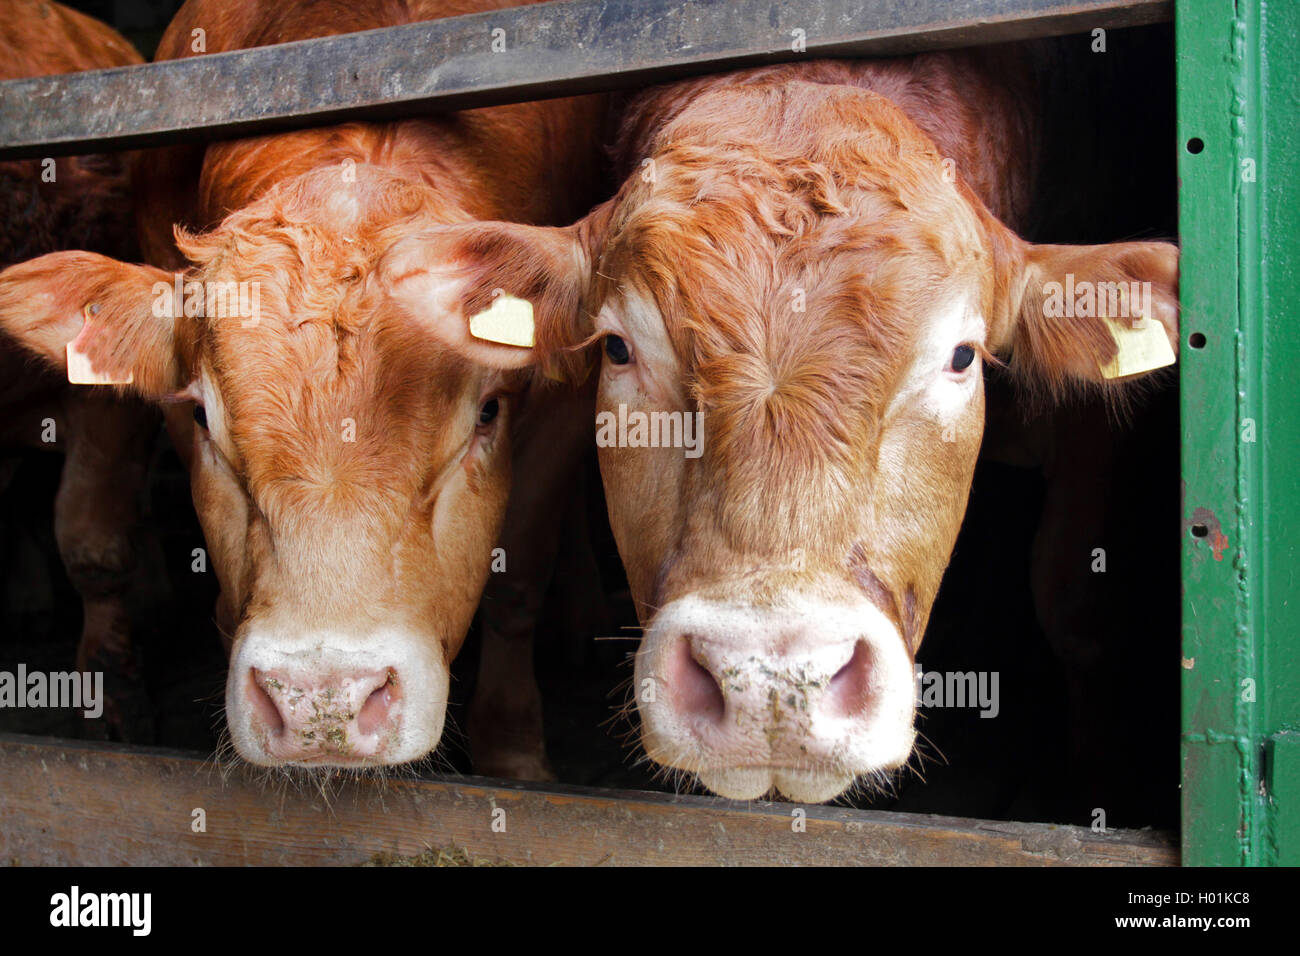 Limousin cattle, domestic cattle (Bos primigenius f. taurus), two bulls in the stable, front view, Germany Stock Photo